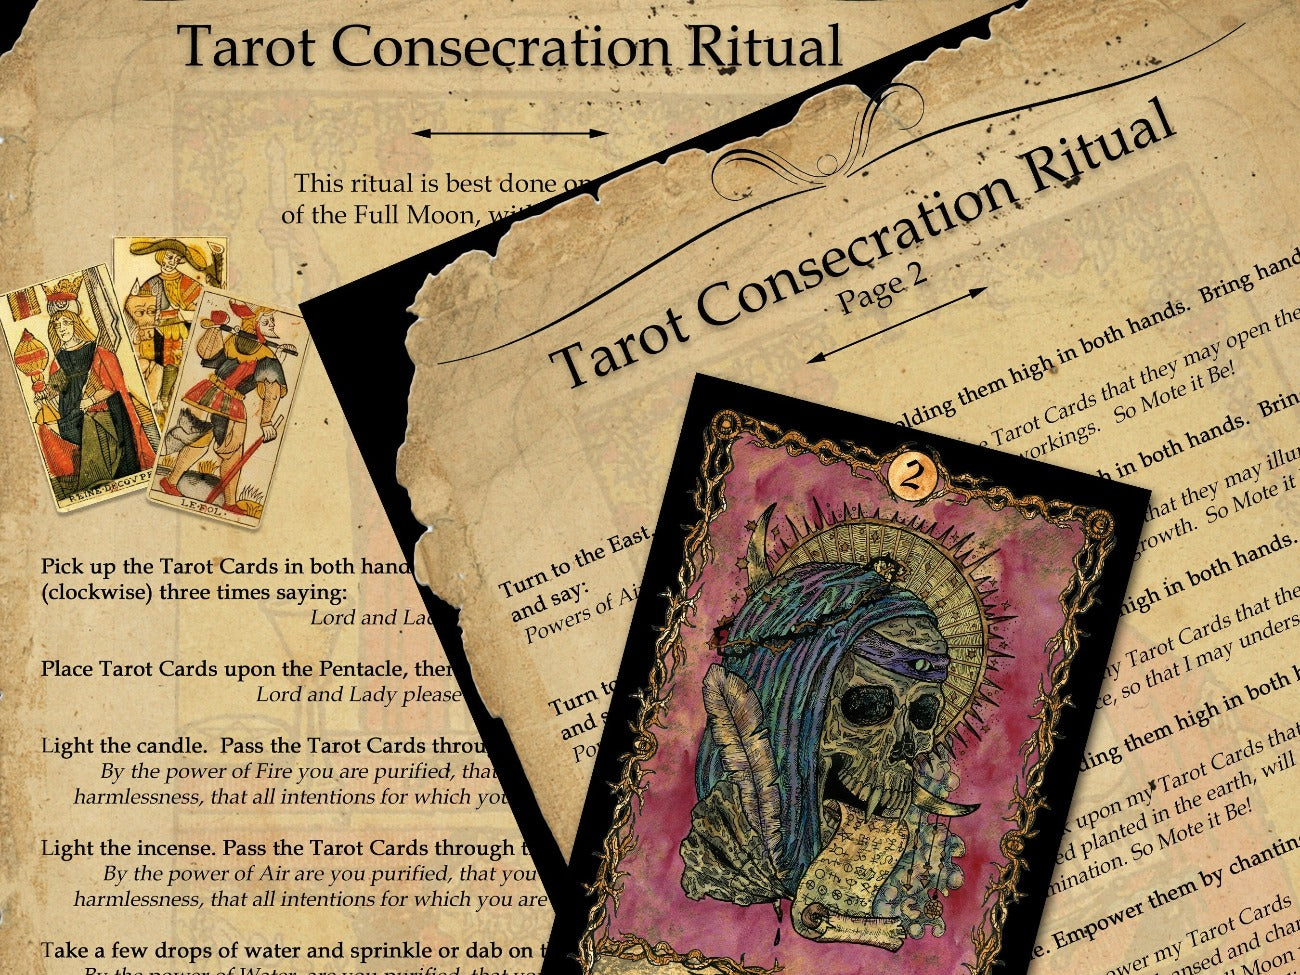 TAROT BLESSING RITUAL 2 Pages, Tarot Card Blessing Spell, Oracle Deck Prayer Ritual, Tarot Witch Spell, Wicca Witchcraft Printable Spell - Morgana Magick Spell